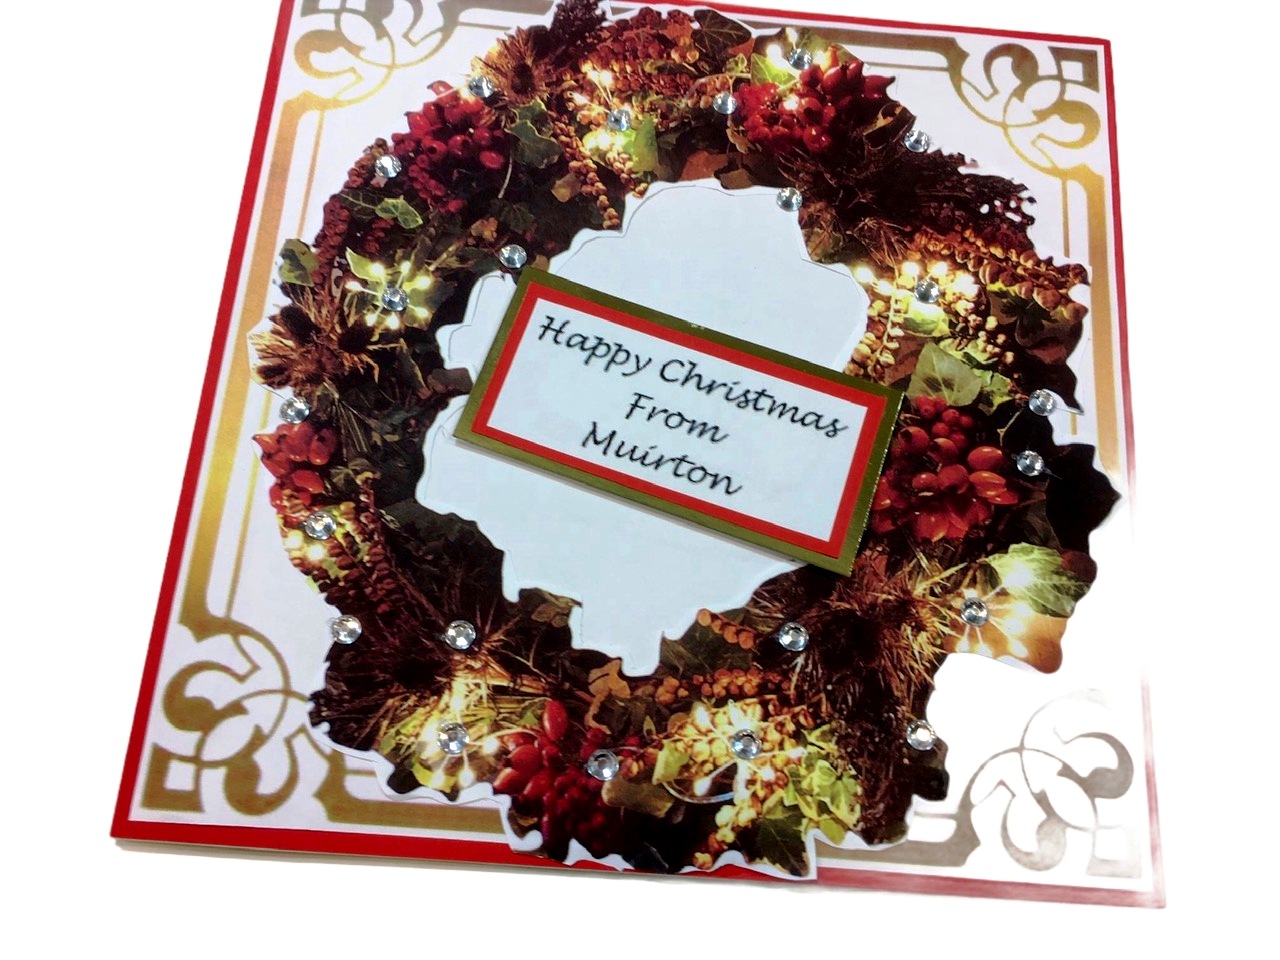 Muirton Christmas Wreath - Click DOWNLOAD below and enter FREE@FREE.com